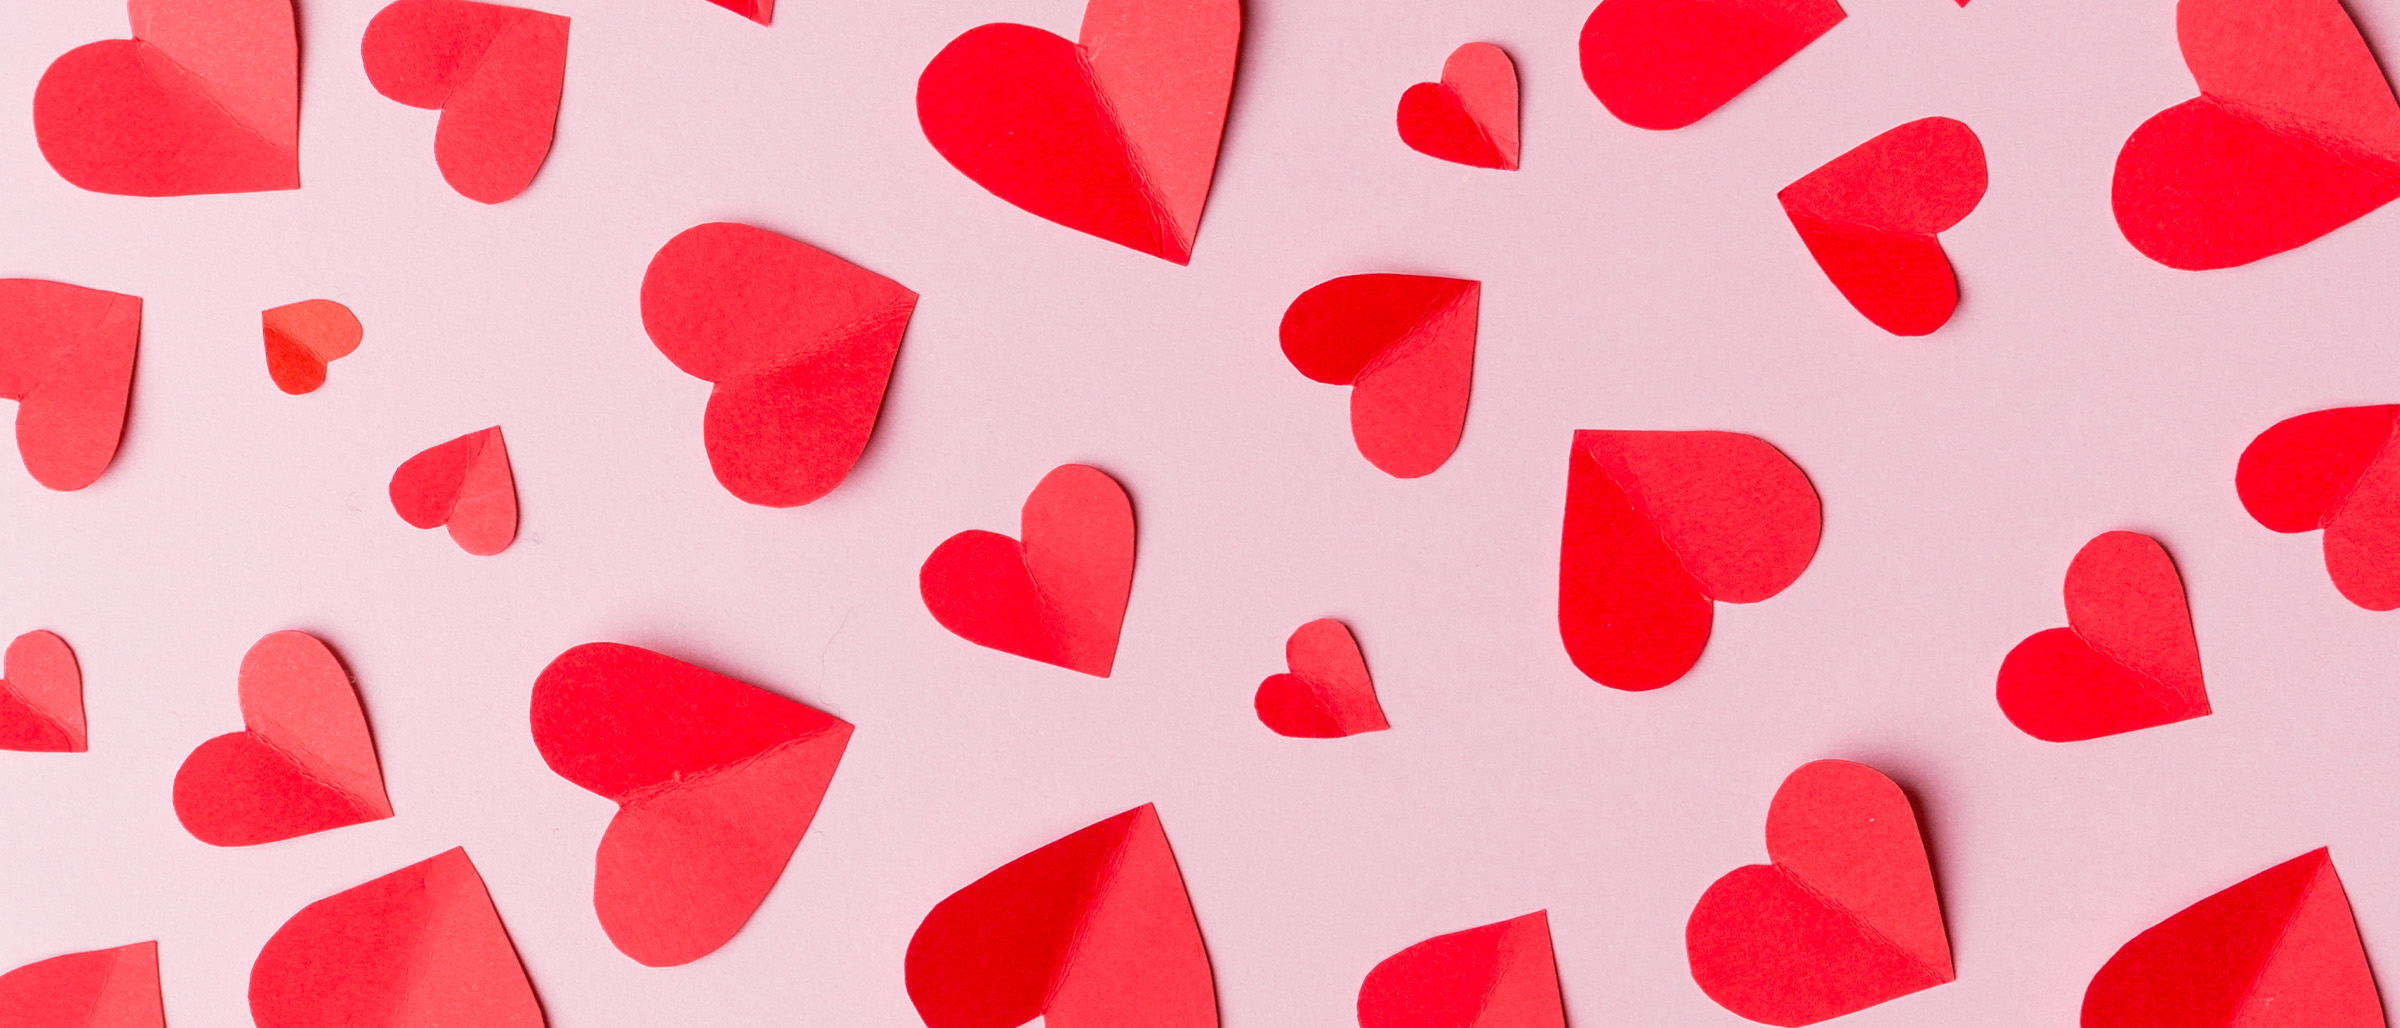 Red Hearts on Pink Background